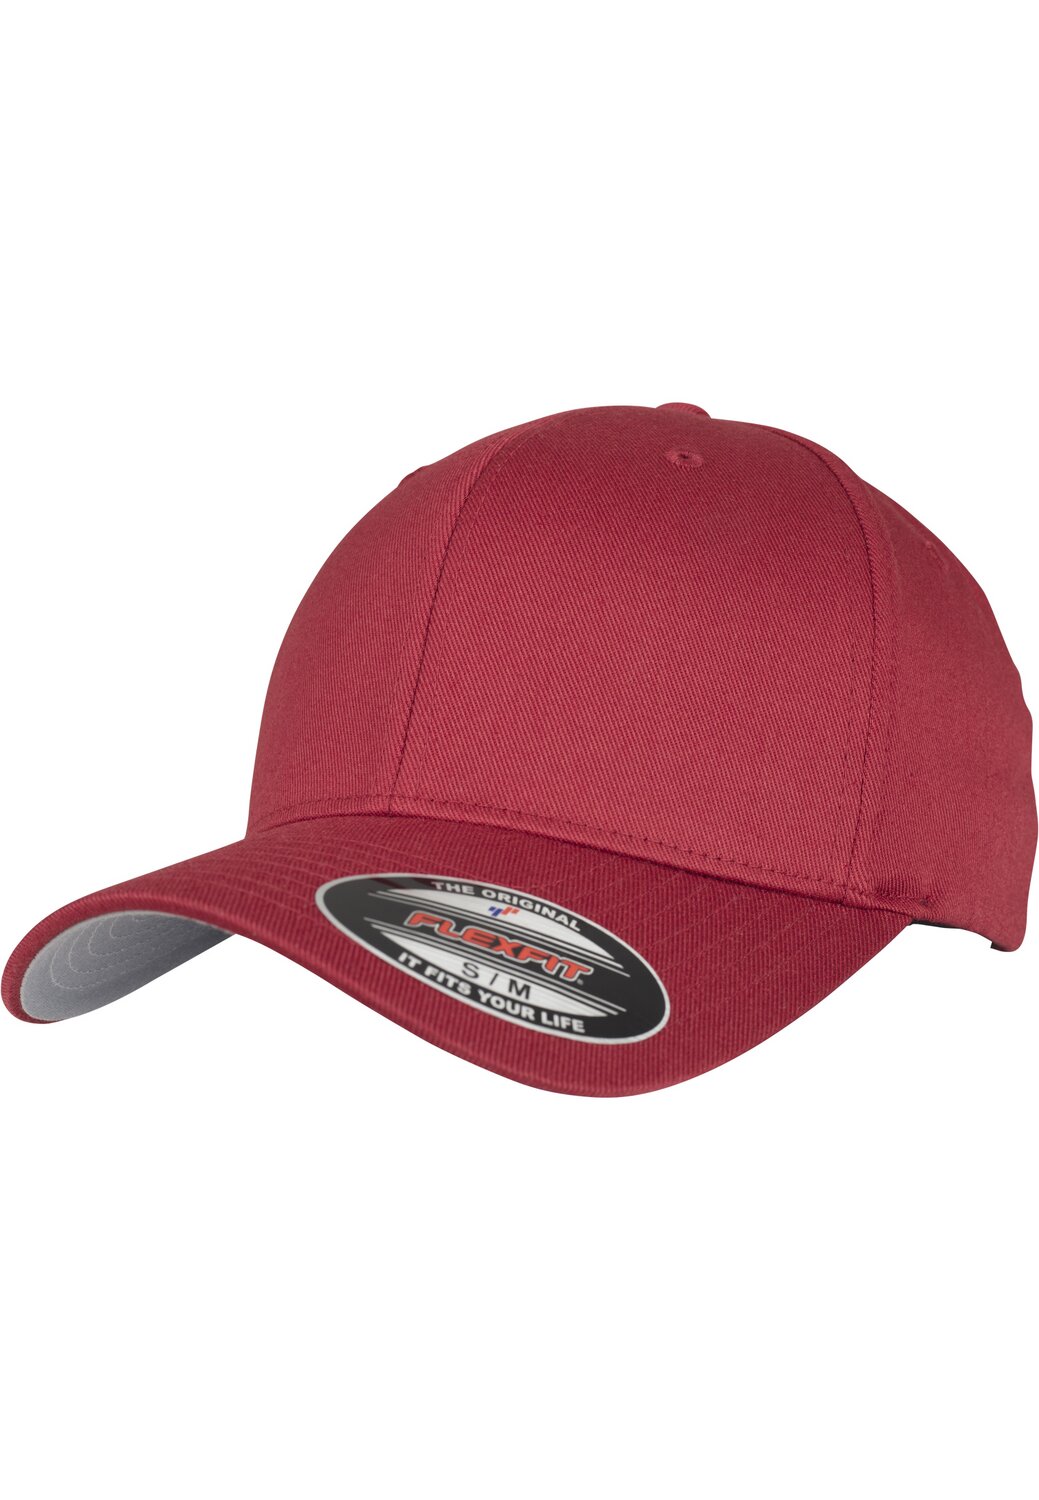 Baseball Cap Wooly Combed Flexfit brown | MAXISCOOT rose